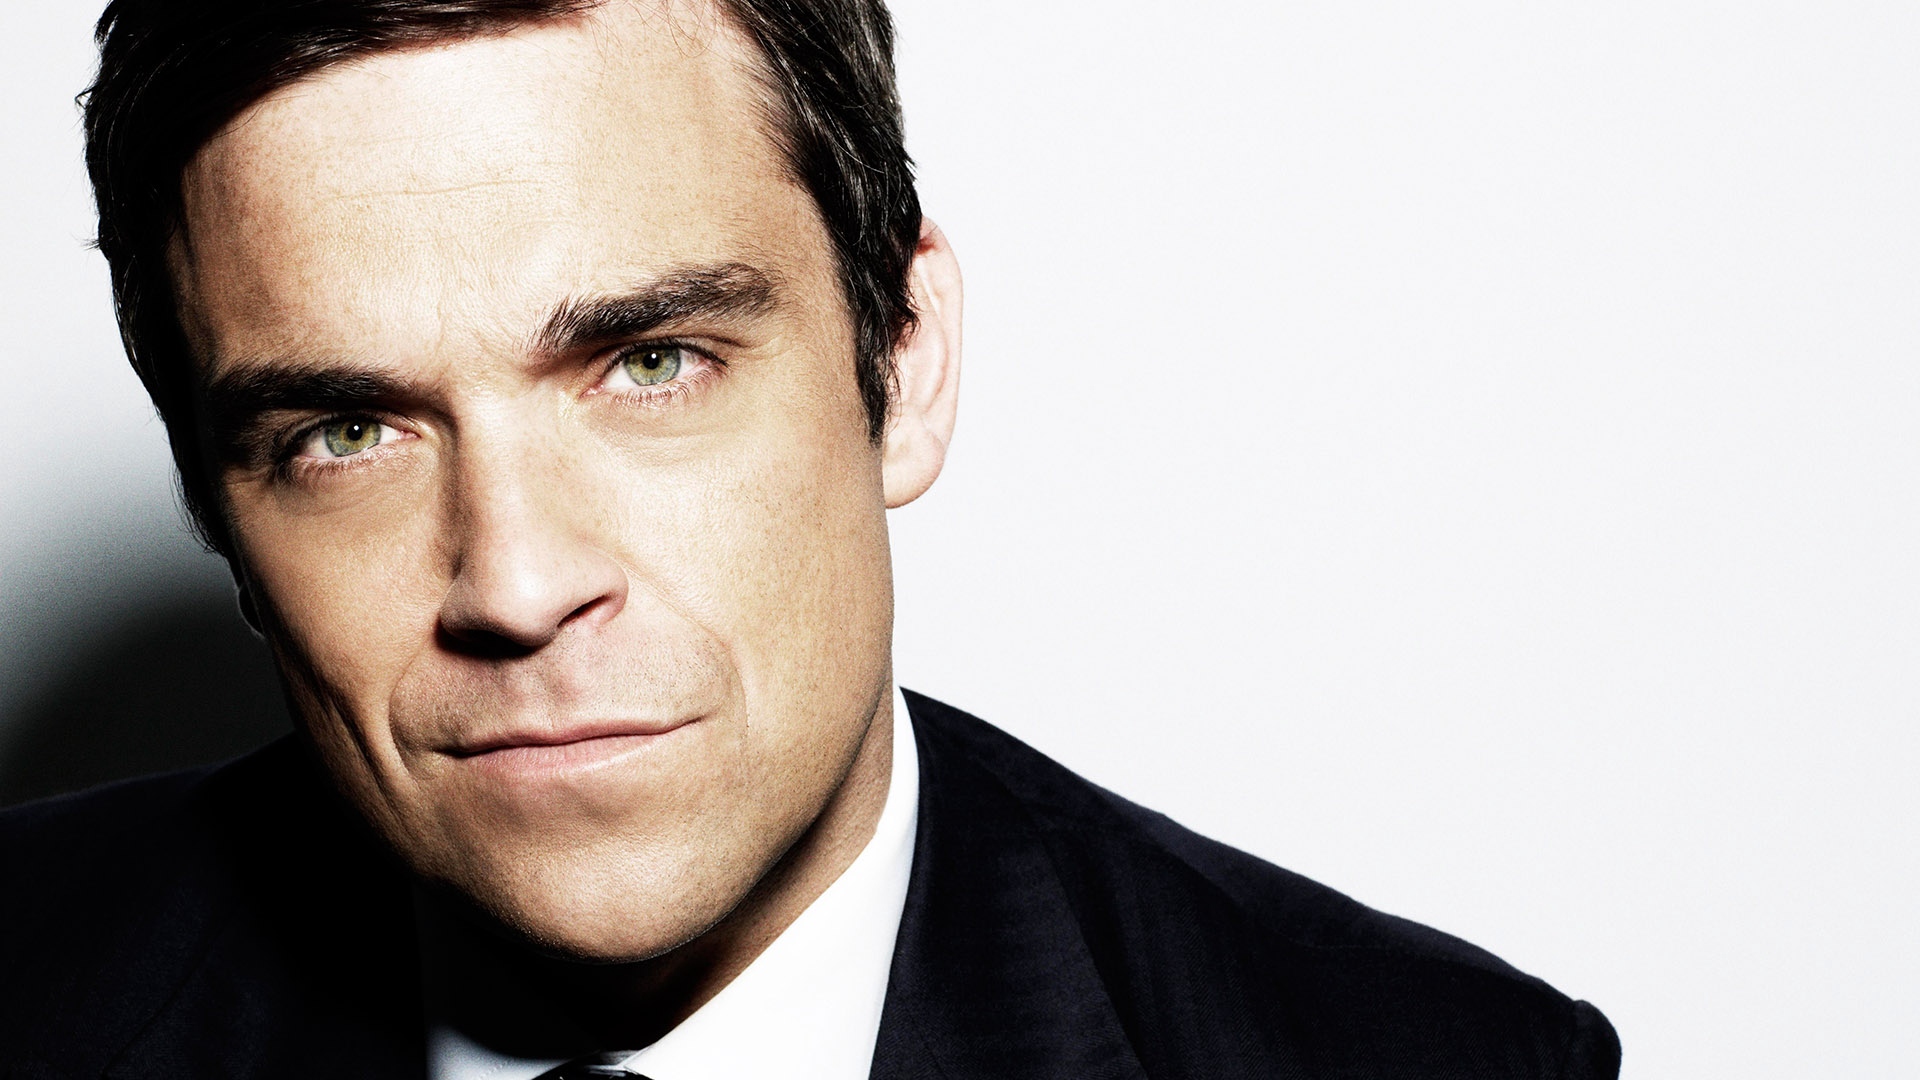 Wallpaper Robbie Williams, Suit, Face, Eyebrows, Tie - Robbie Williams Reality Killed - HD Wallpaper 